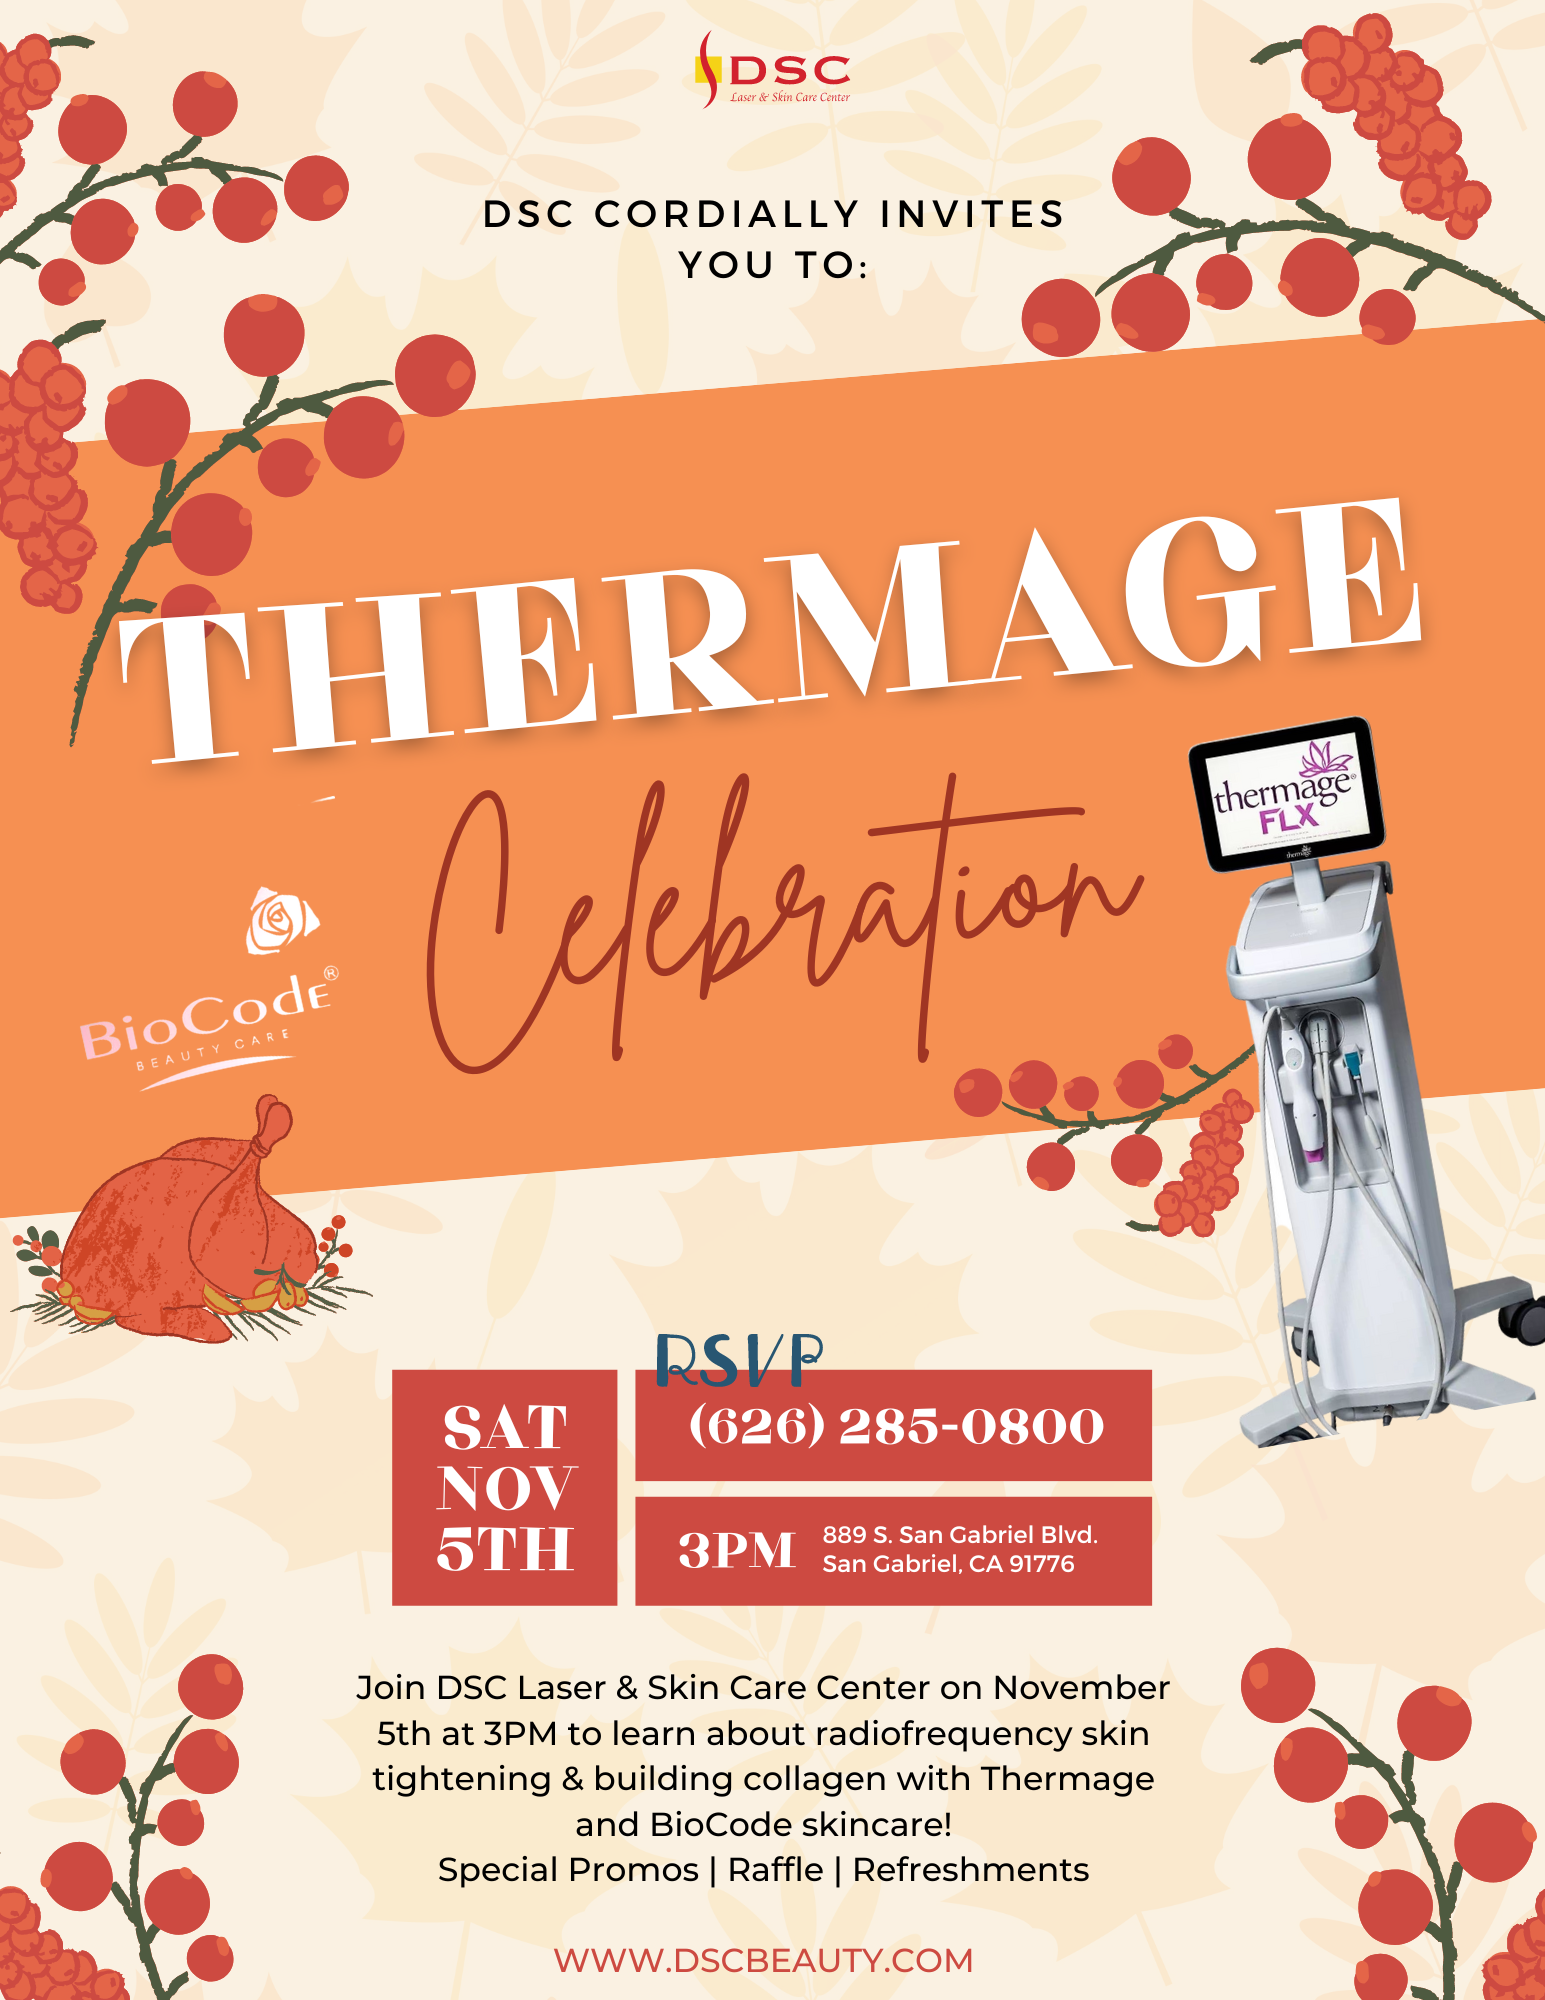 Flyer for DSC Laser & Skin Care Center x Thermage Saturday November 5th at 3PM Event 